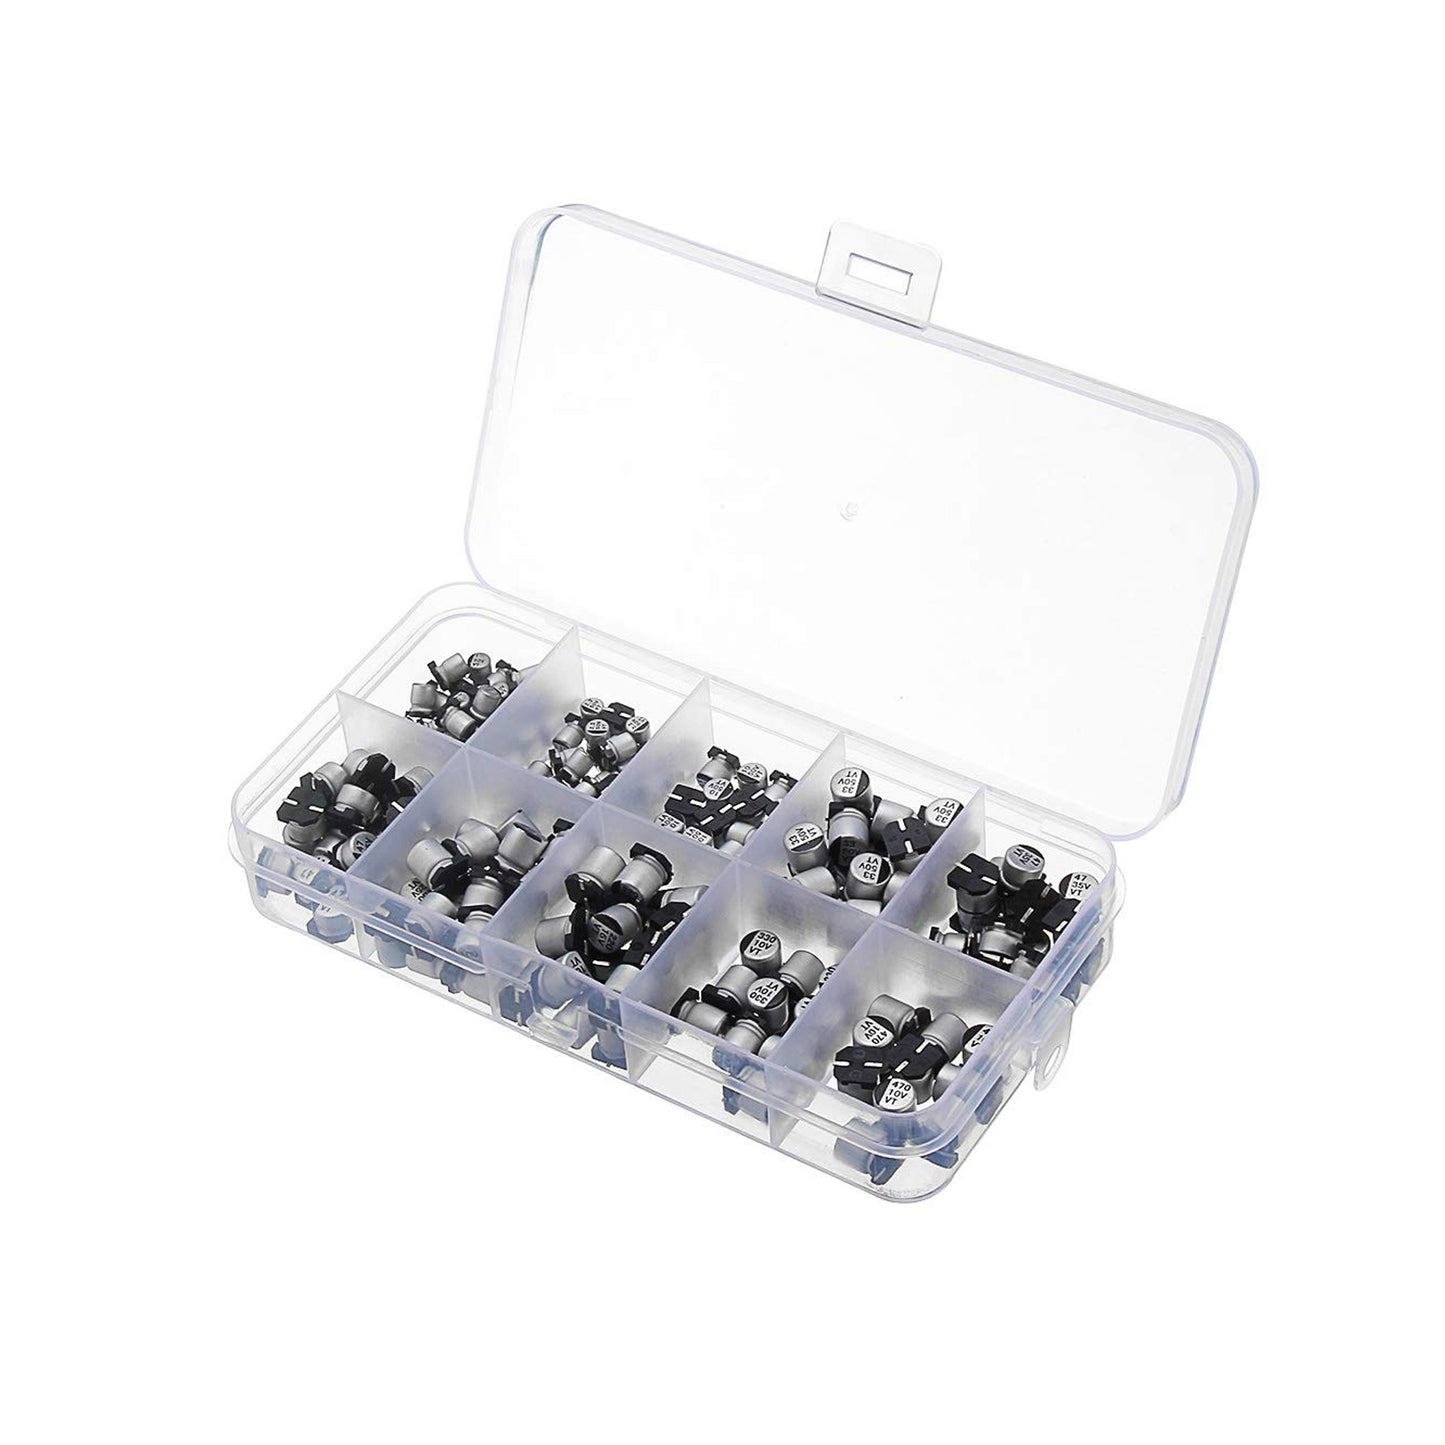 SMD electrolytic Capacitor, 200PCS 10V - 50V 1uF - 470uF 10Values Capacitor Assortment kit Capacitor with Storage Box for Household appliances - RS2765 - REES52